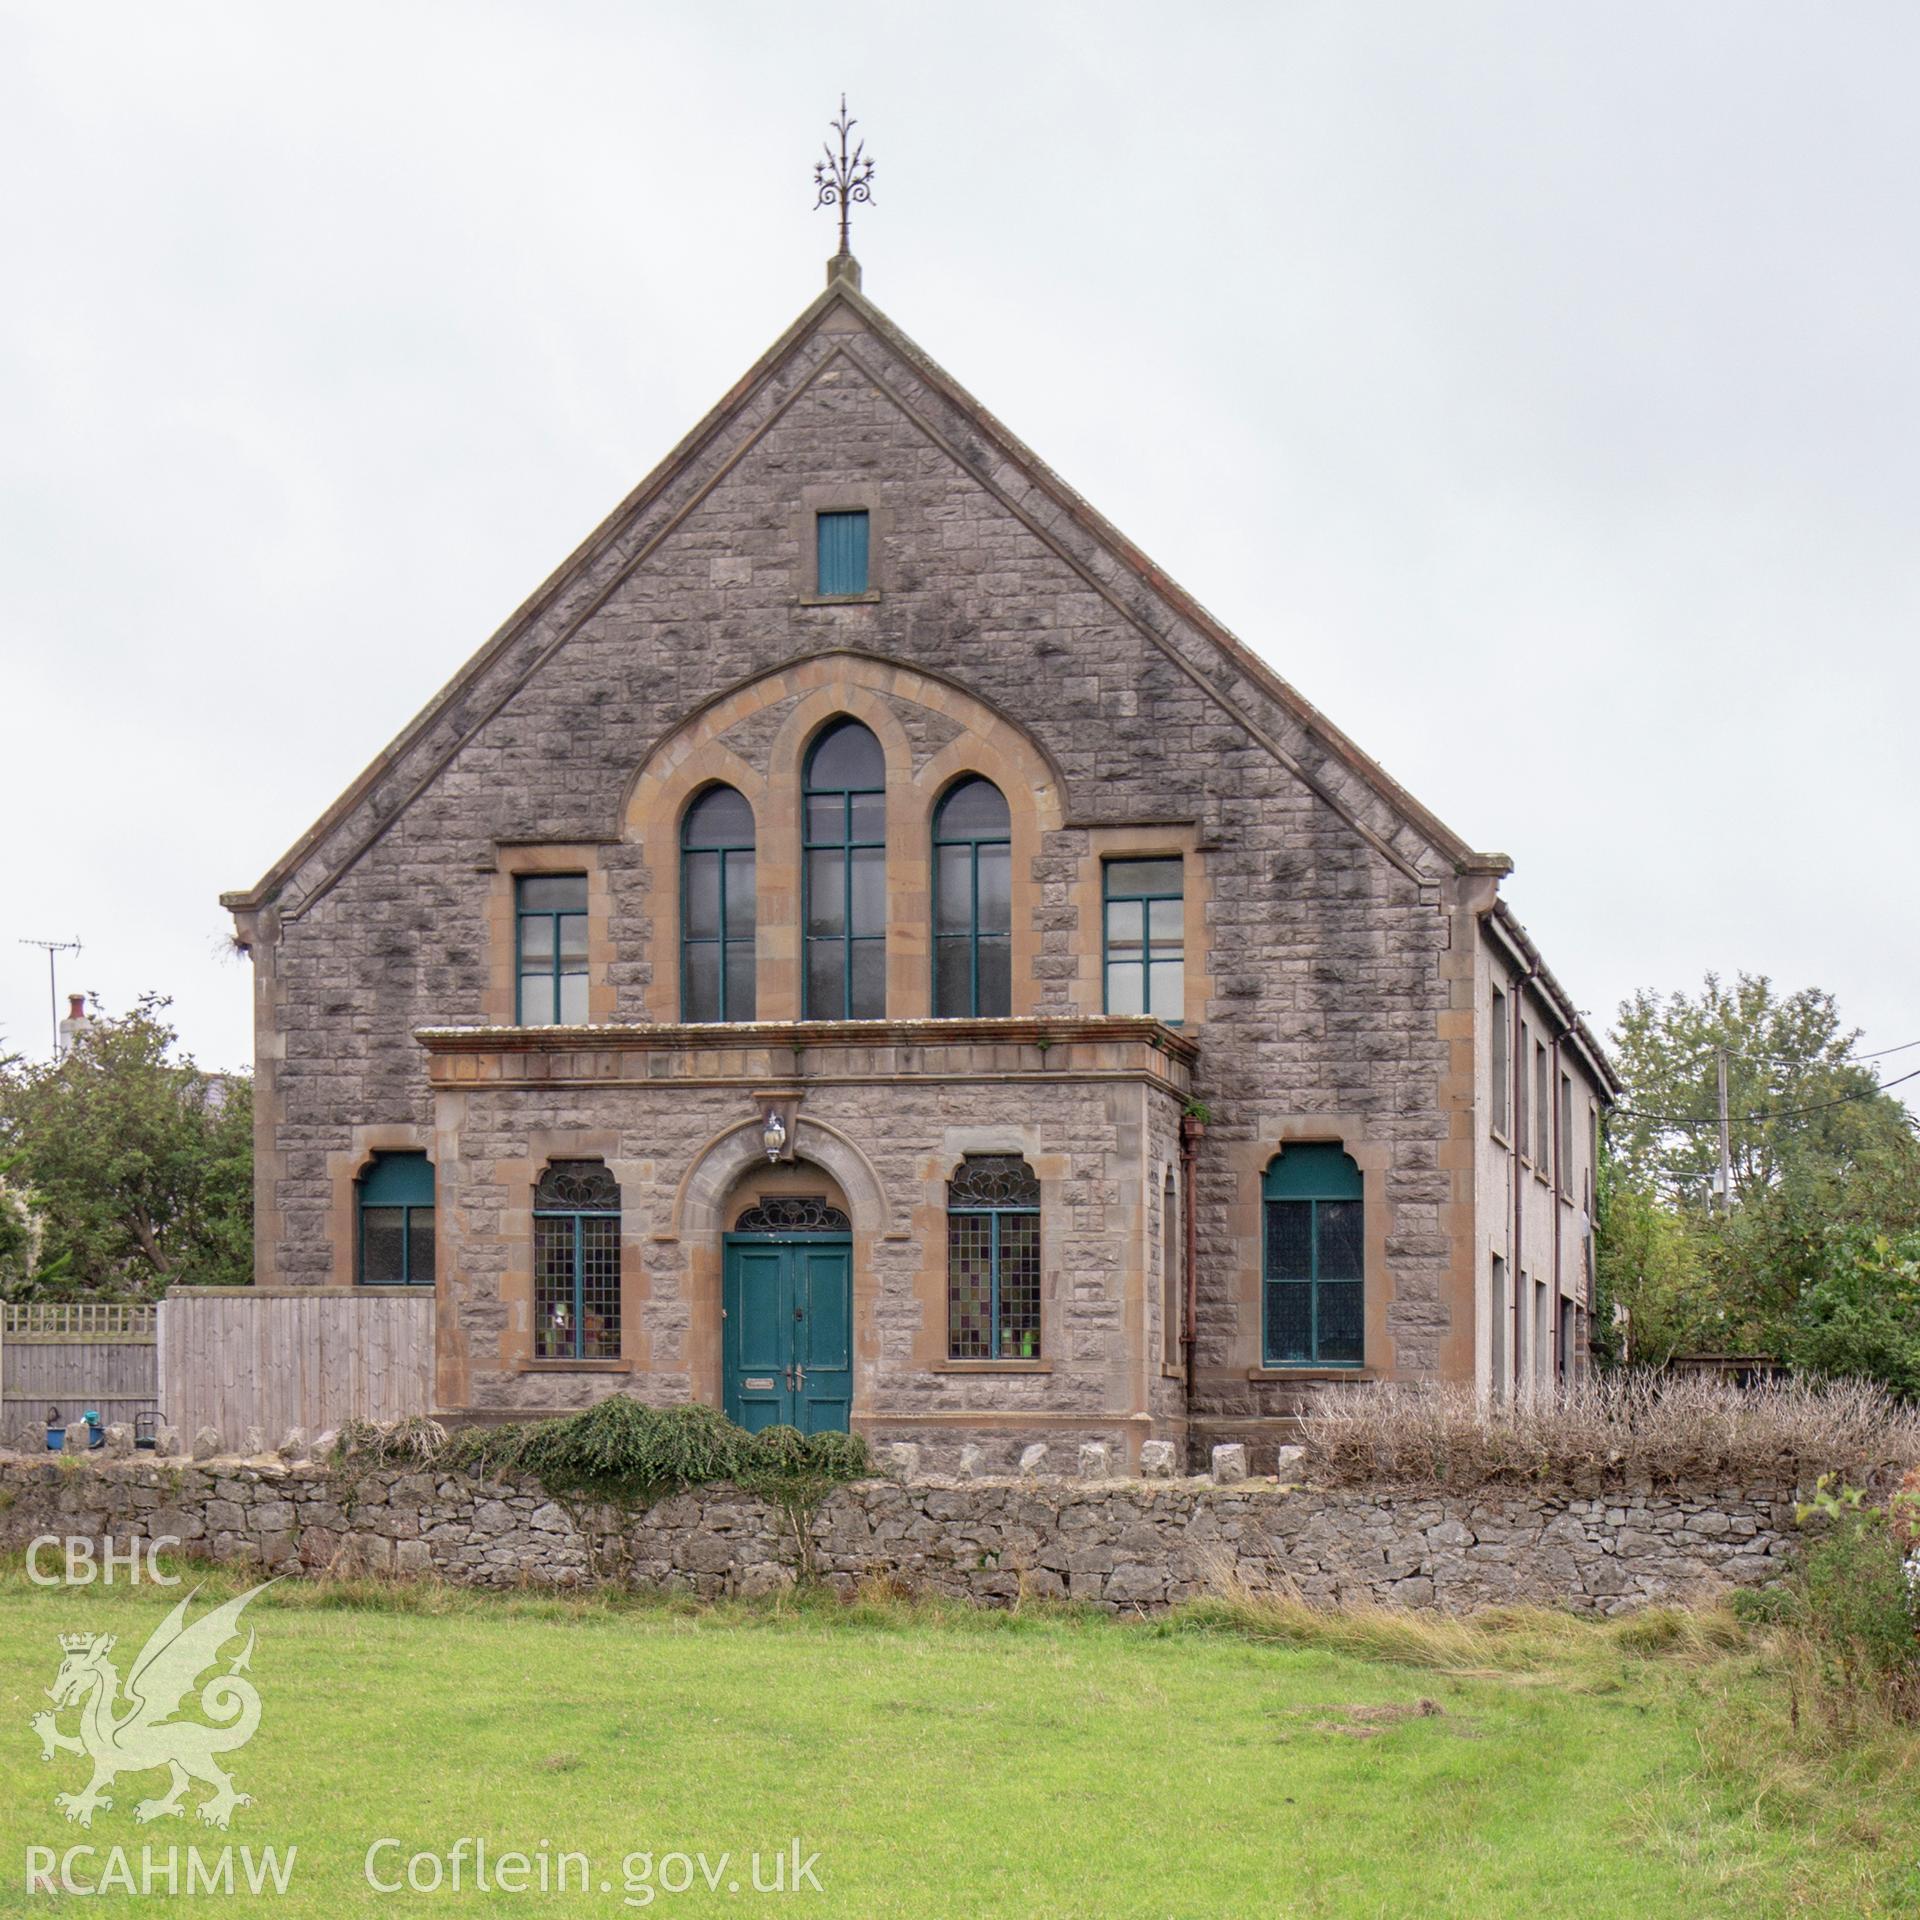 Colour photograph showing front elevation and entrance of Mynydd Seion Wesleyan Methodist chapel, Tanygraig Road, Llysfaen. Photographed by Richard Barrett on 17th September 2018.